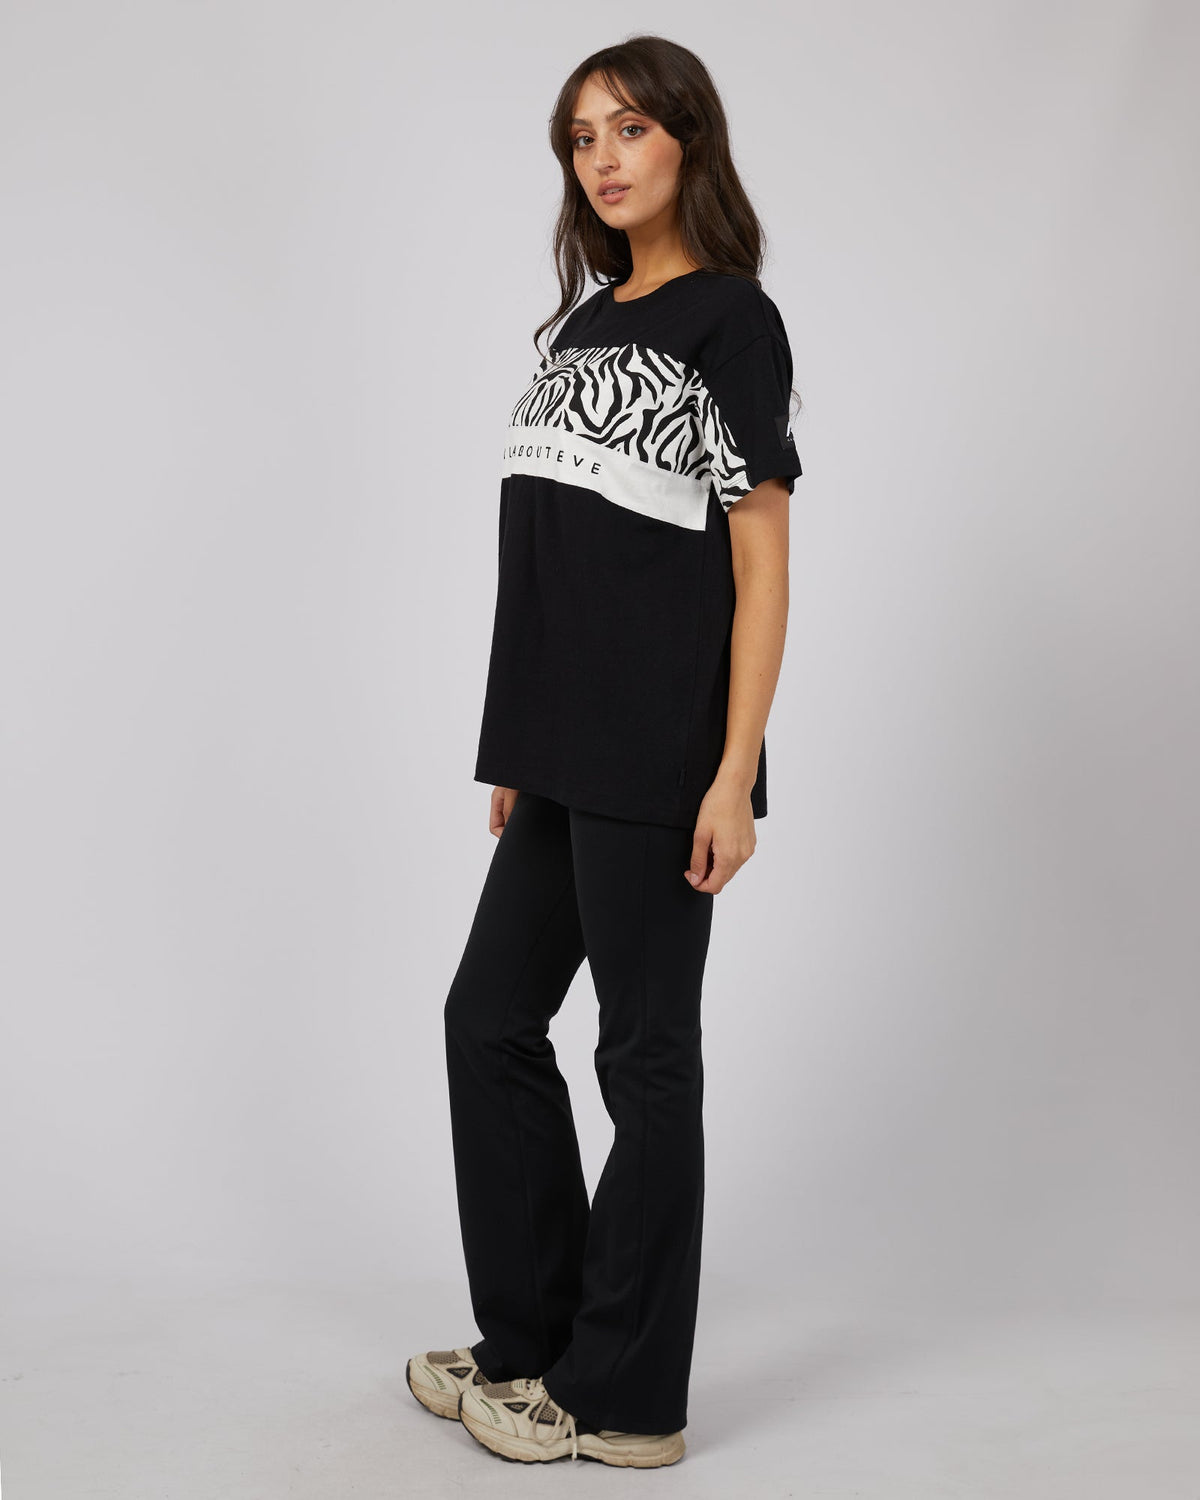 All About Eve-Parker Panelled Tee Black-Edge Clothing